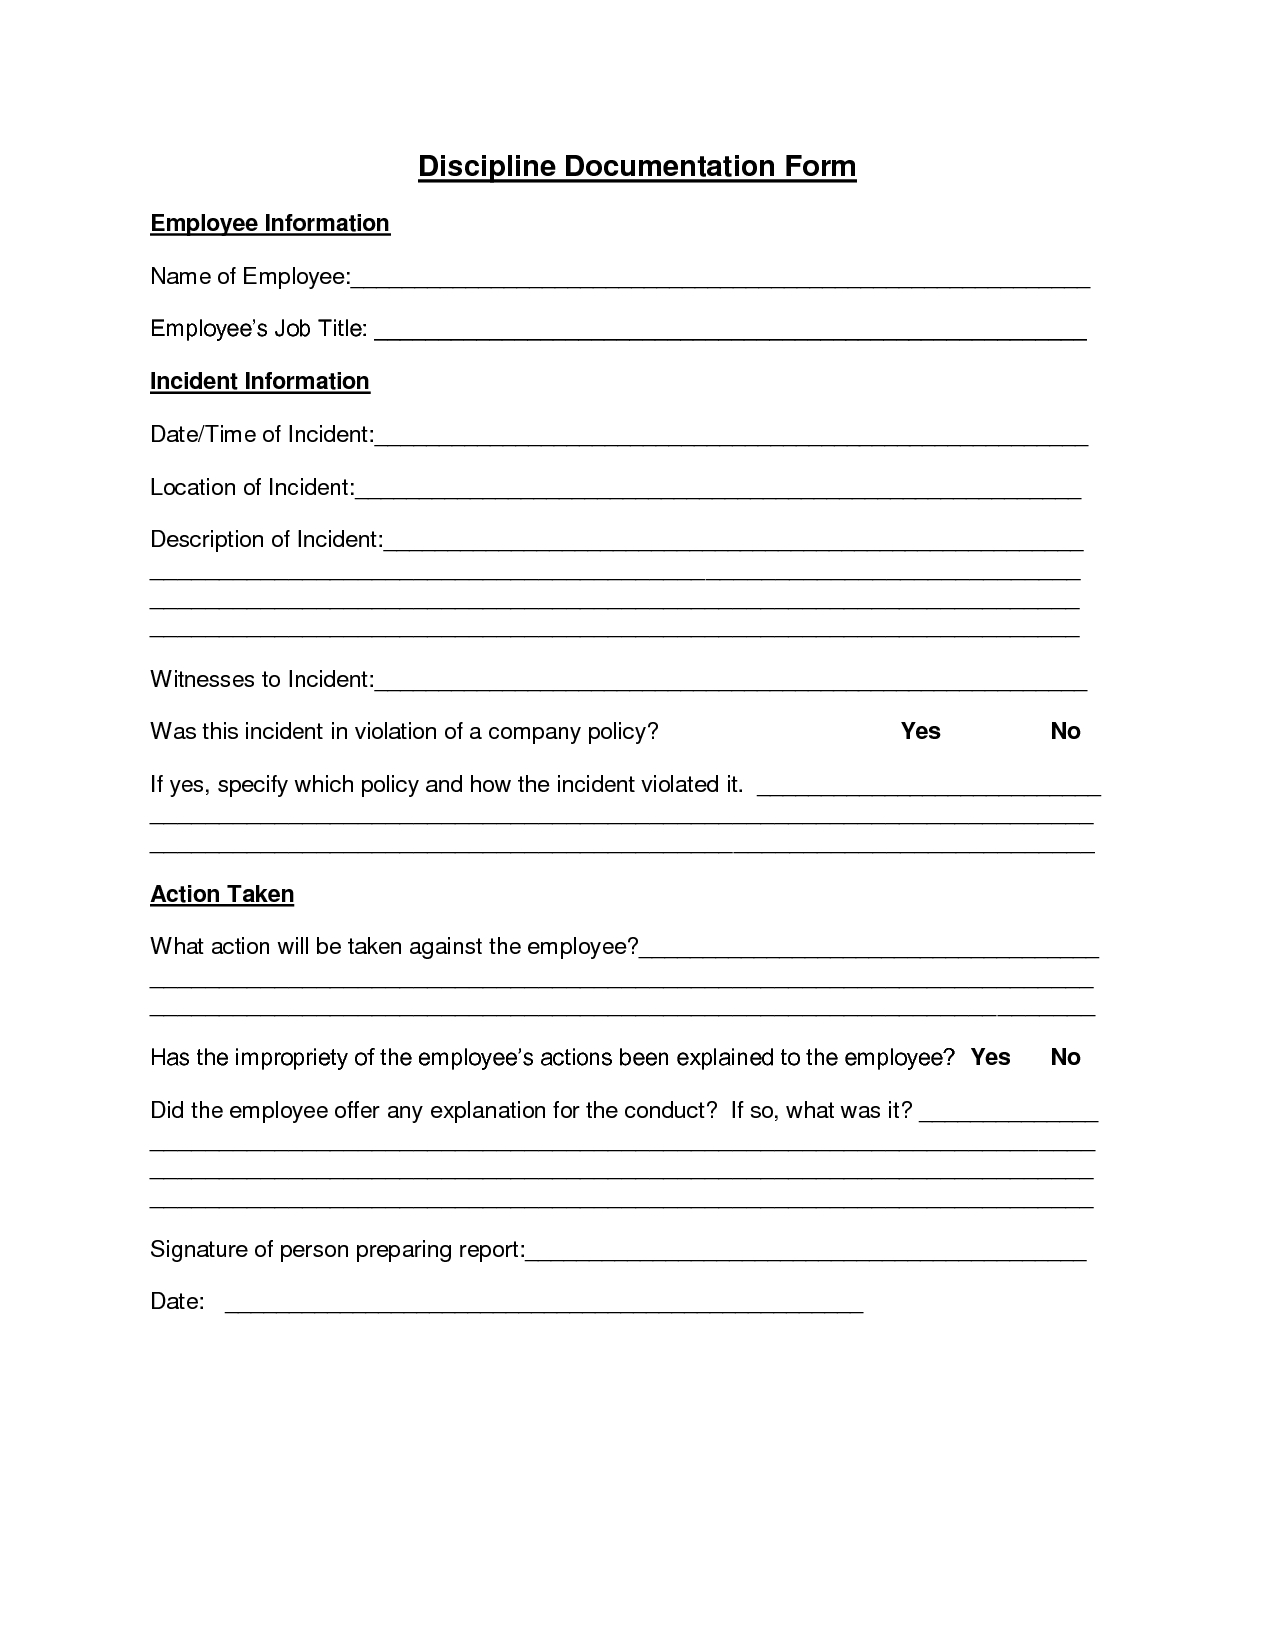 Employee Discipline Form | Employee Forms | Employee Evaluation Form - Free Printable Hr Forms